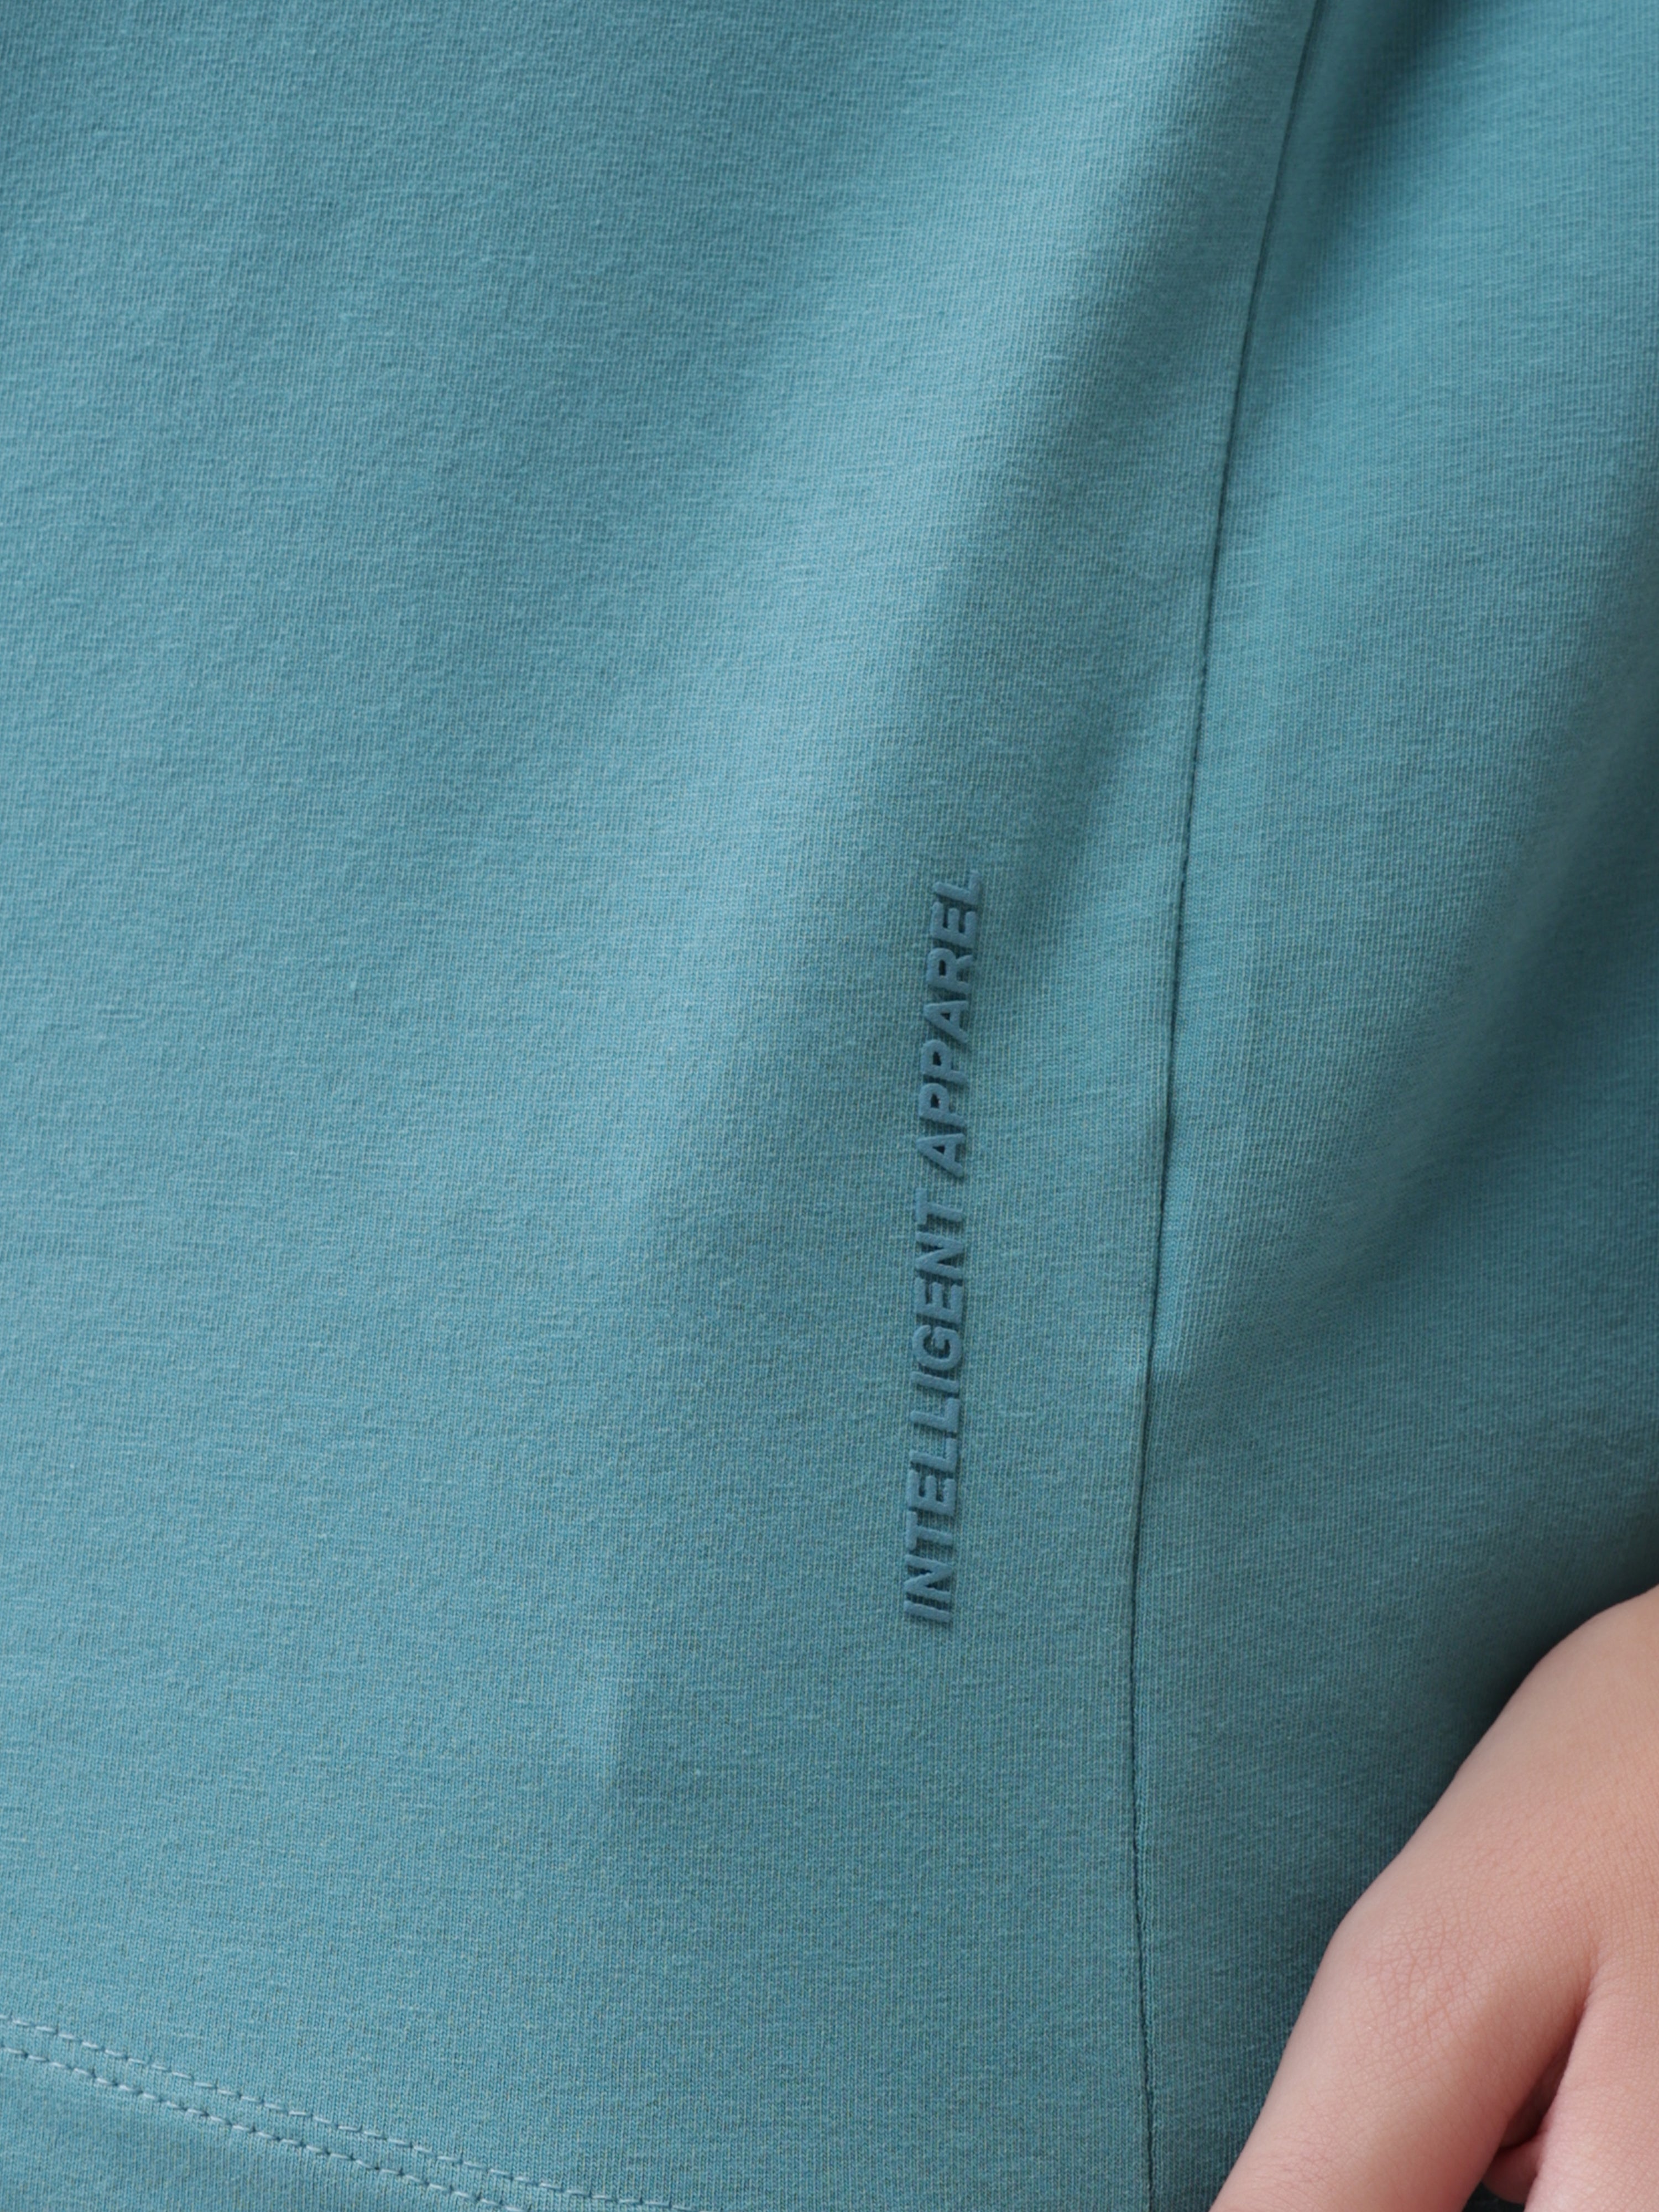 Close-up of turquoise Turms T-shirt, displaying "Intelligent Apparel" text on fabric.